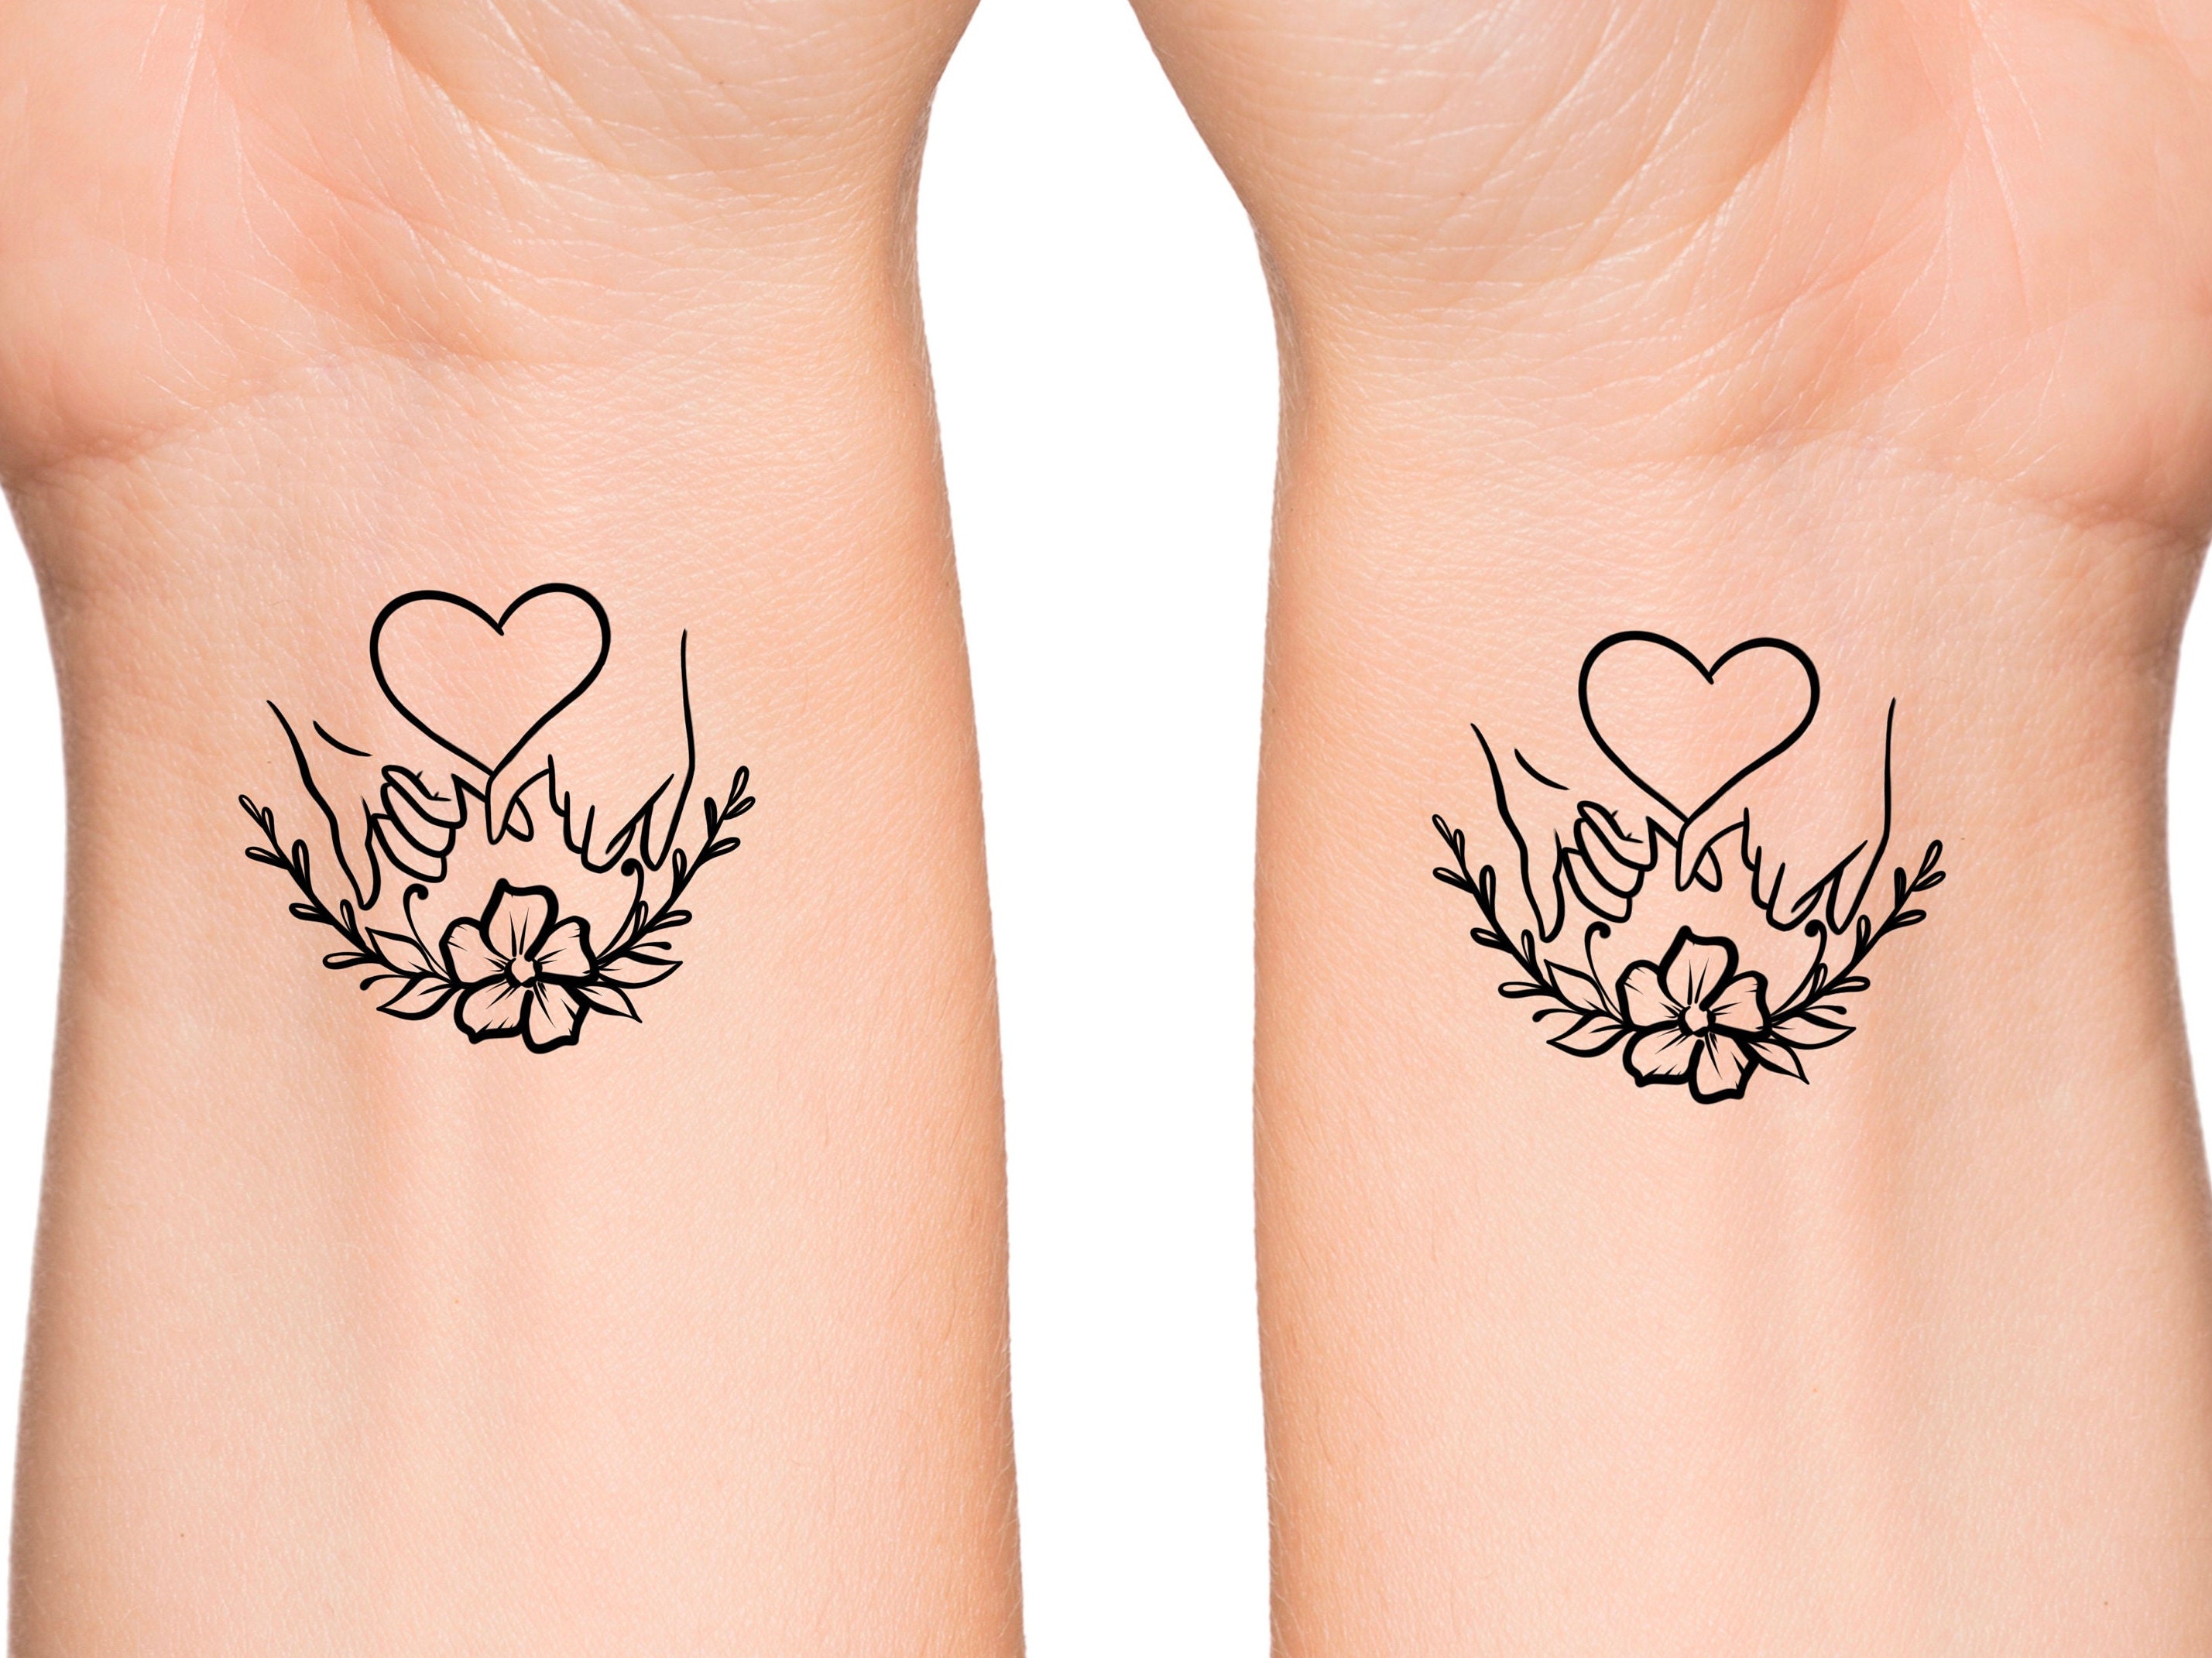 10. "Pinky Promise" Matching Tattoos for Best Friends - Cute and Simple Designs - wide 5